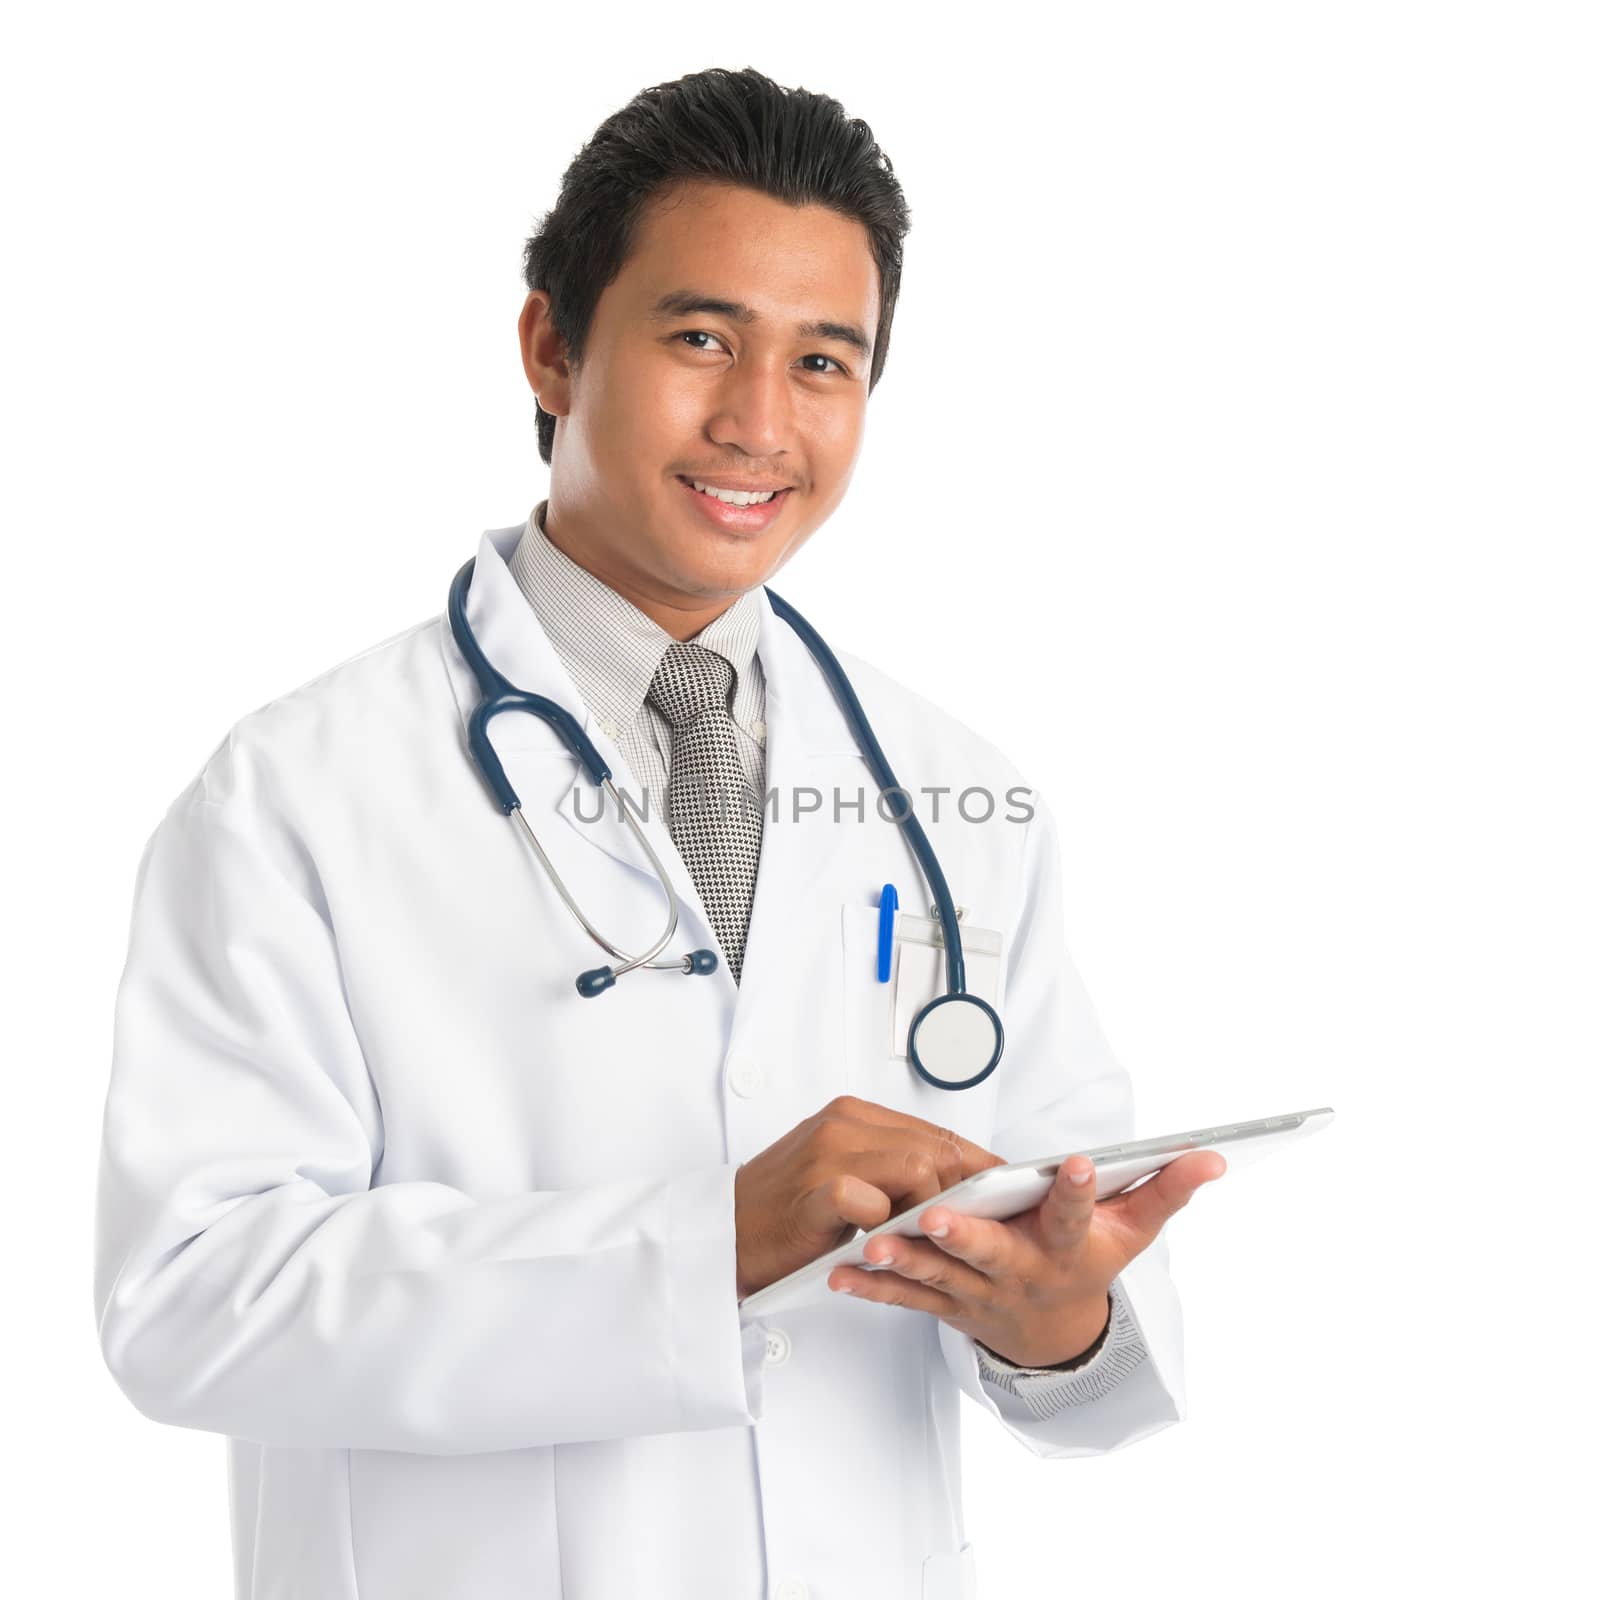 Portrait of southeast Asian male medical doctor using digital tablet computer, standing isolated on white background. Young man model.